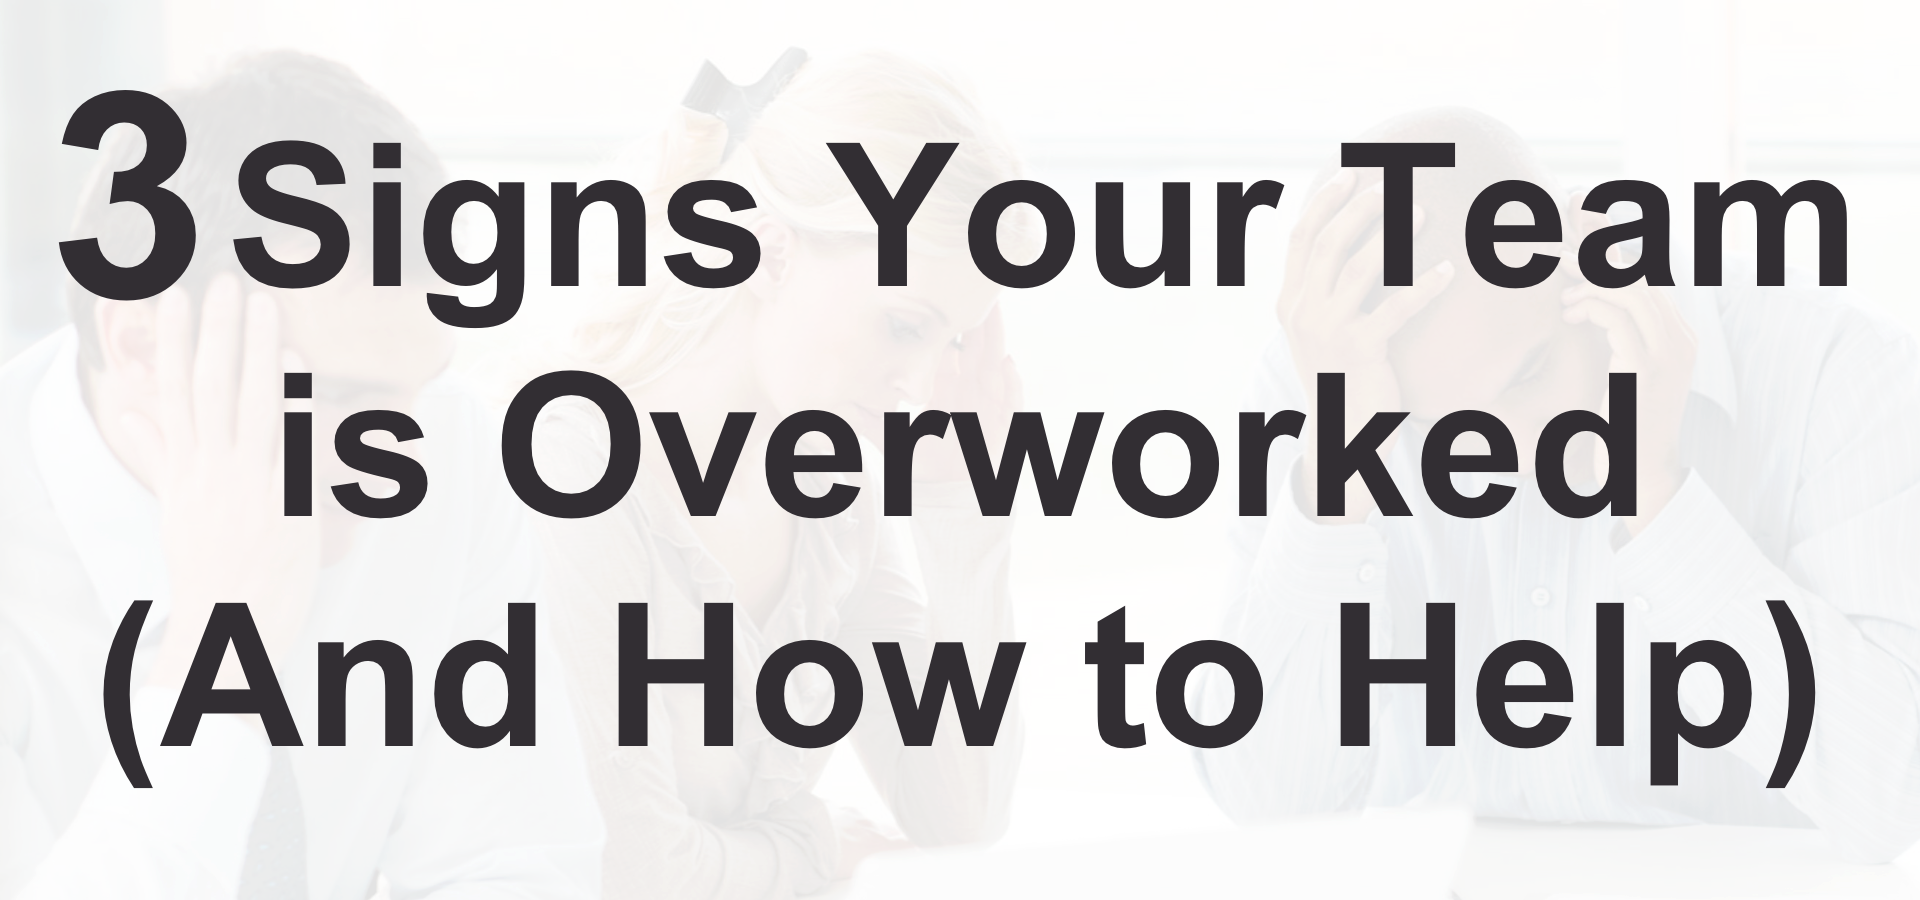 3 Signs Your Team is Overworked (And How to Help)